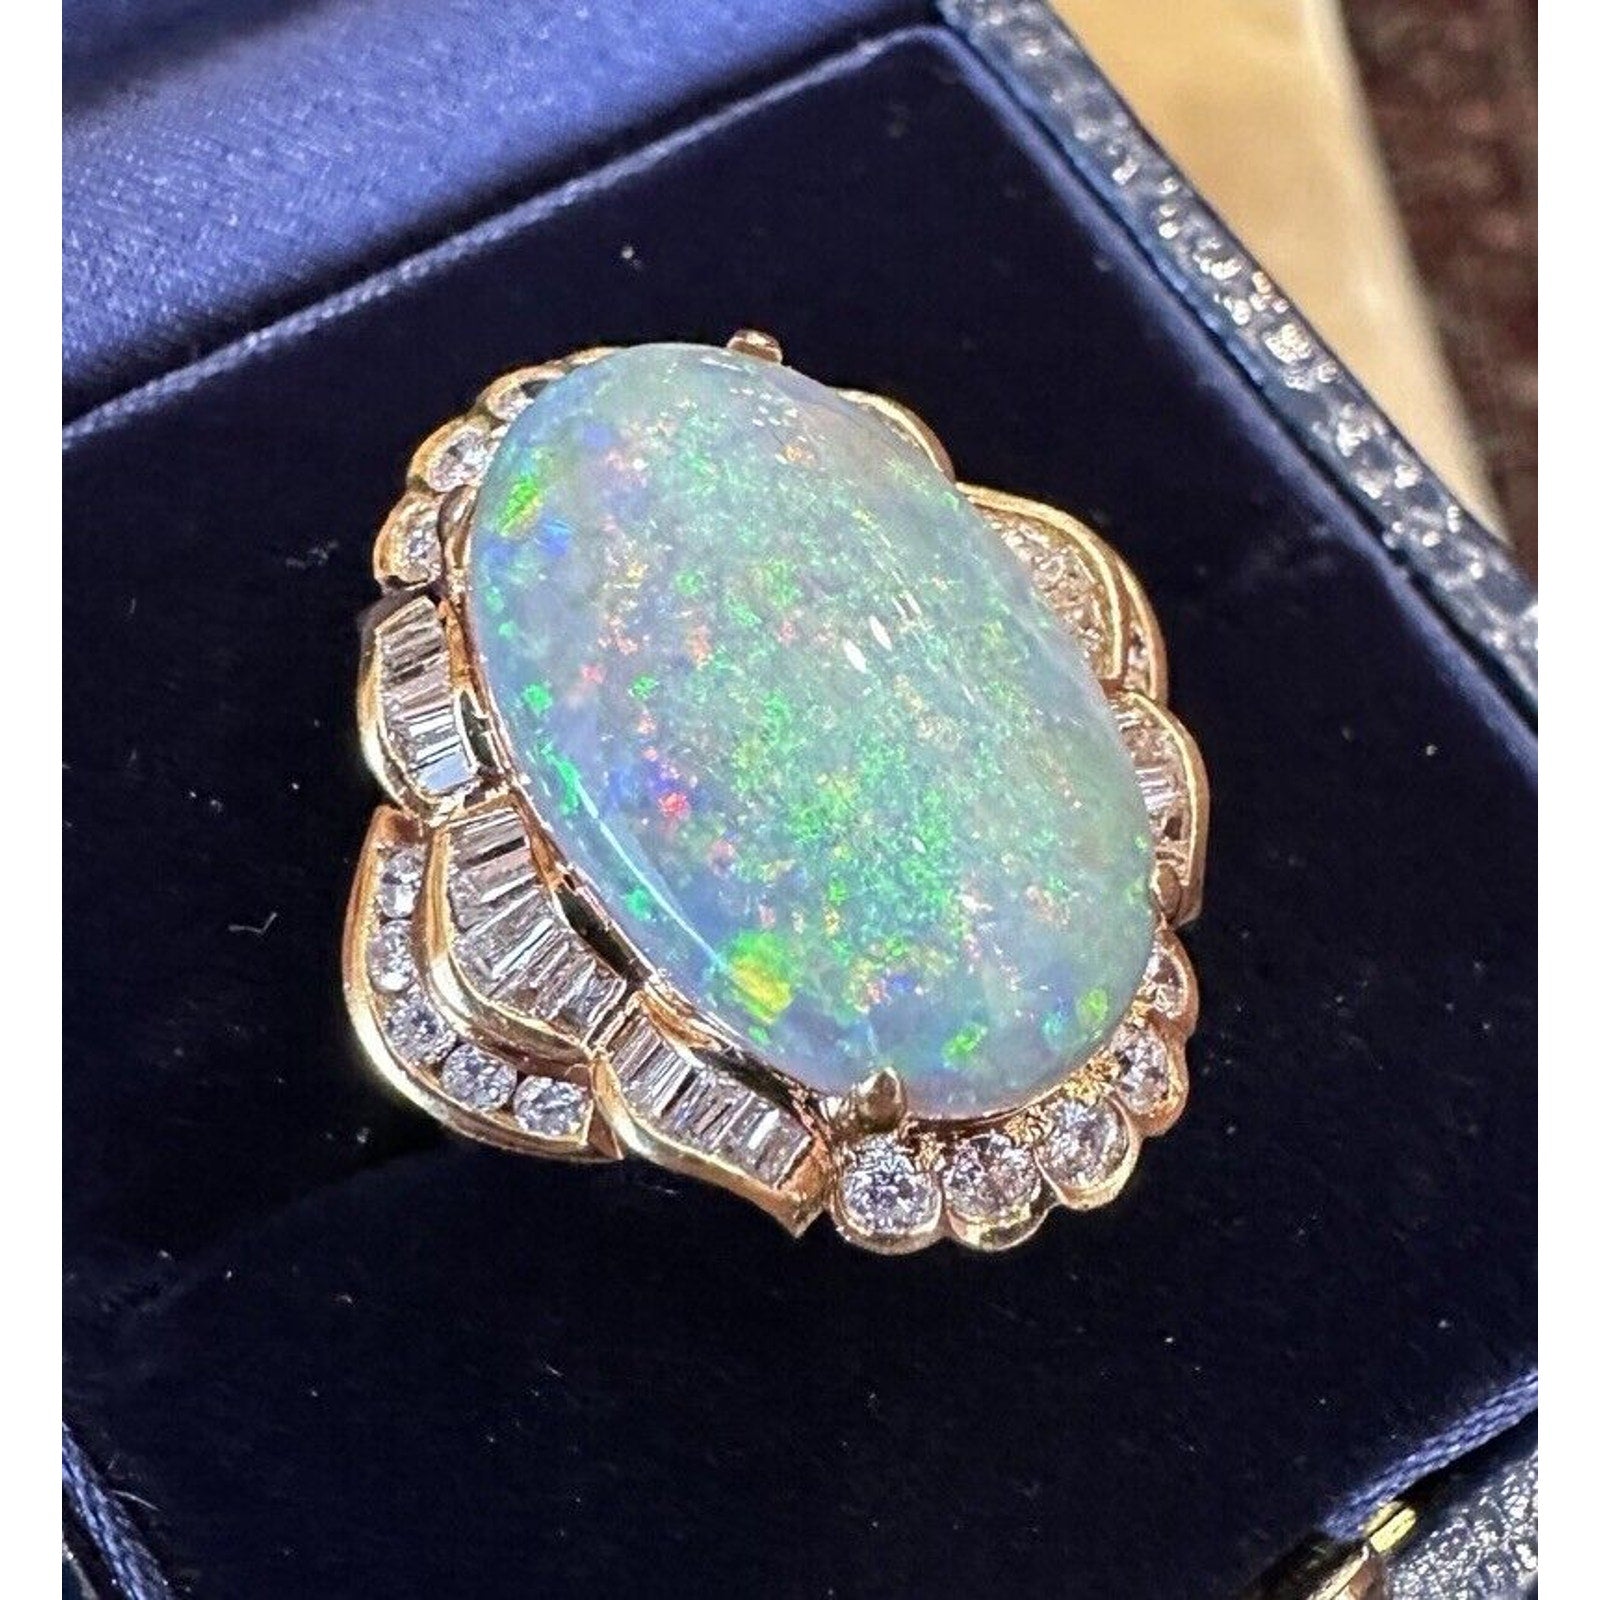 Oval Opal and Diamond Ring 6.53 ct in 18k Yellow Gold - HM2570SA